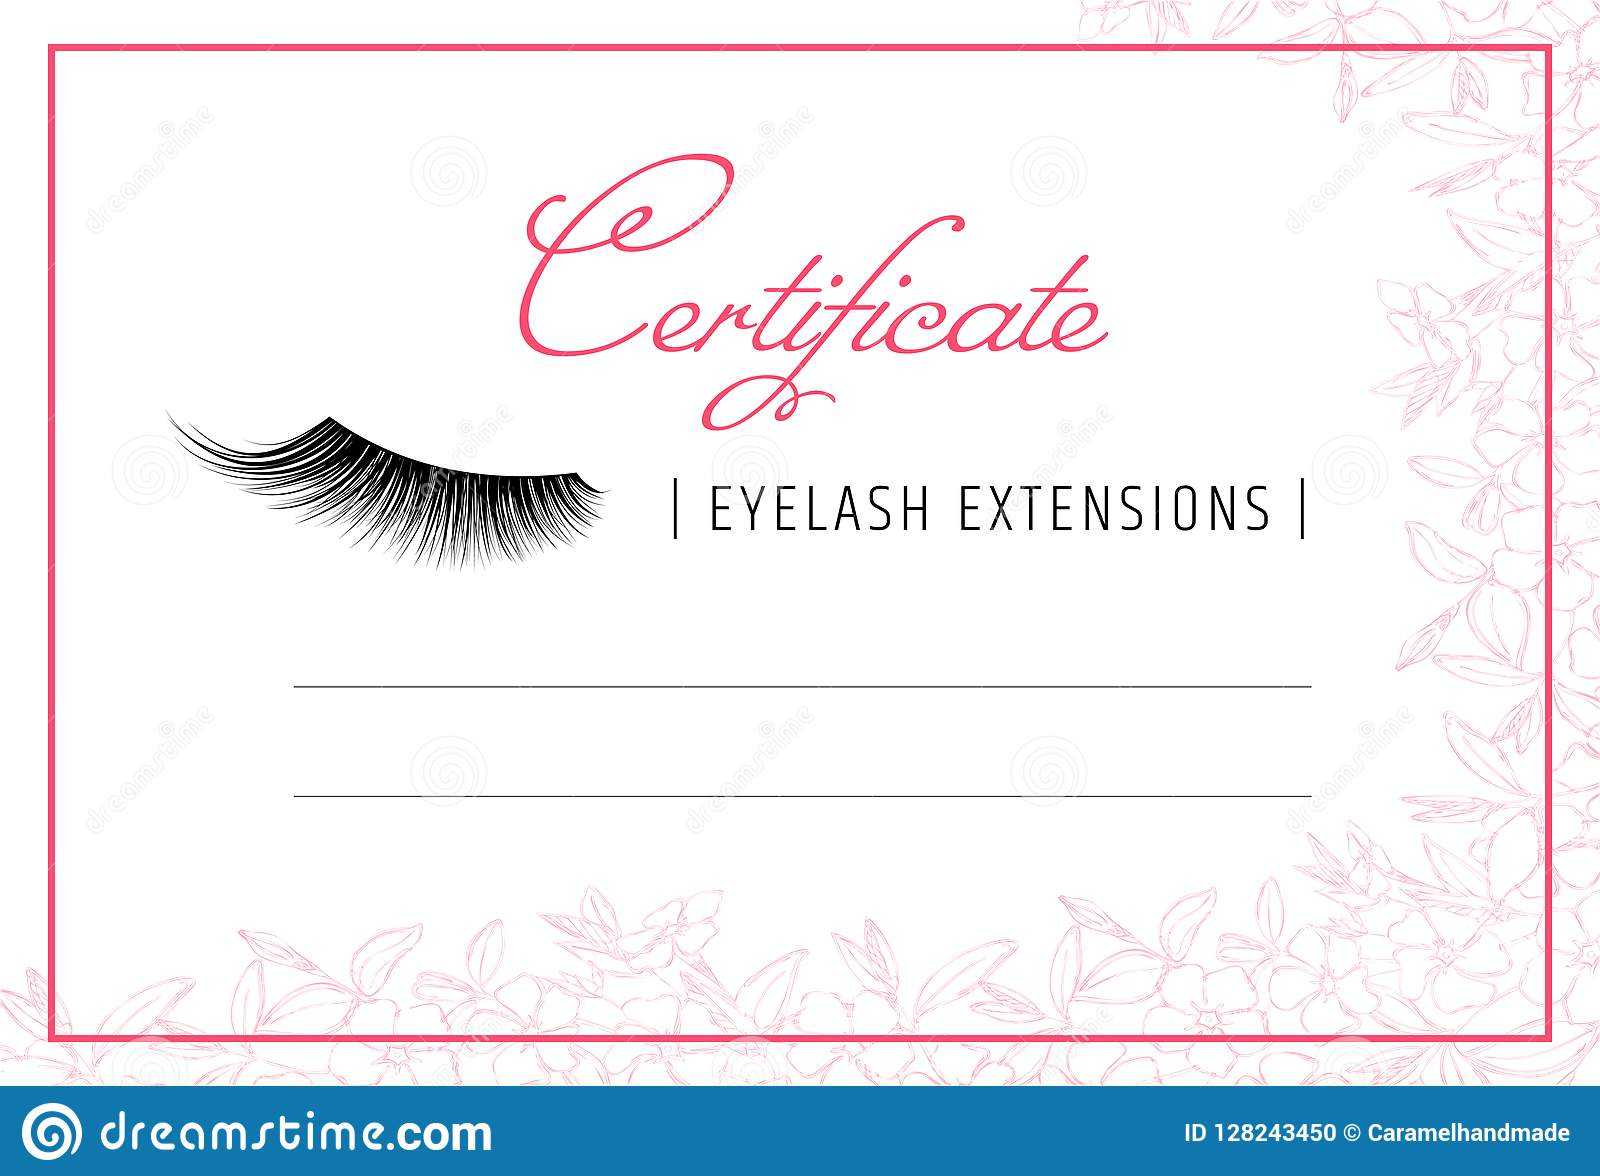 Diploma Eyelash Extensions. Makeup Certificate Template Intended For School Certificate Templates Free